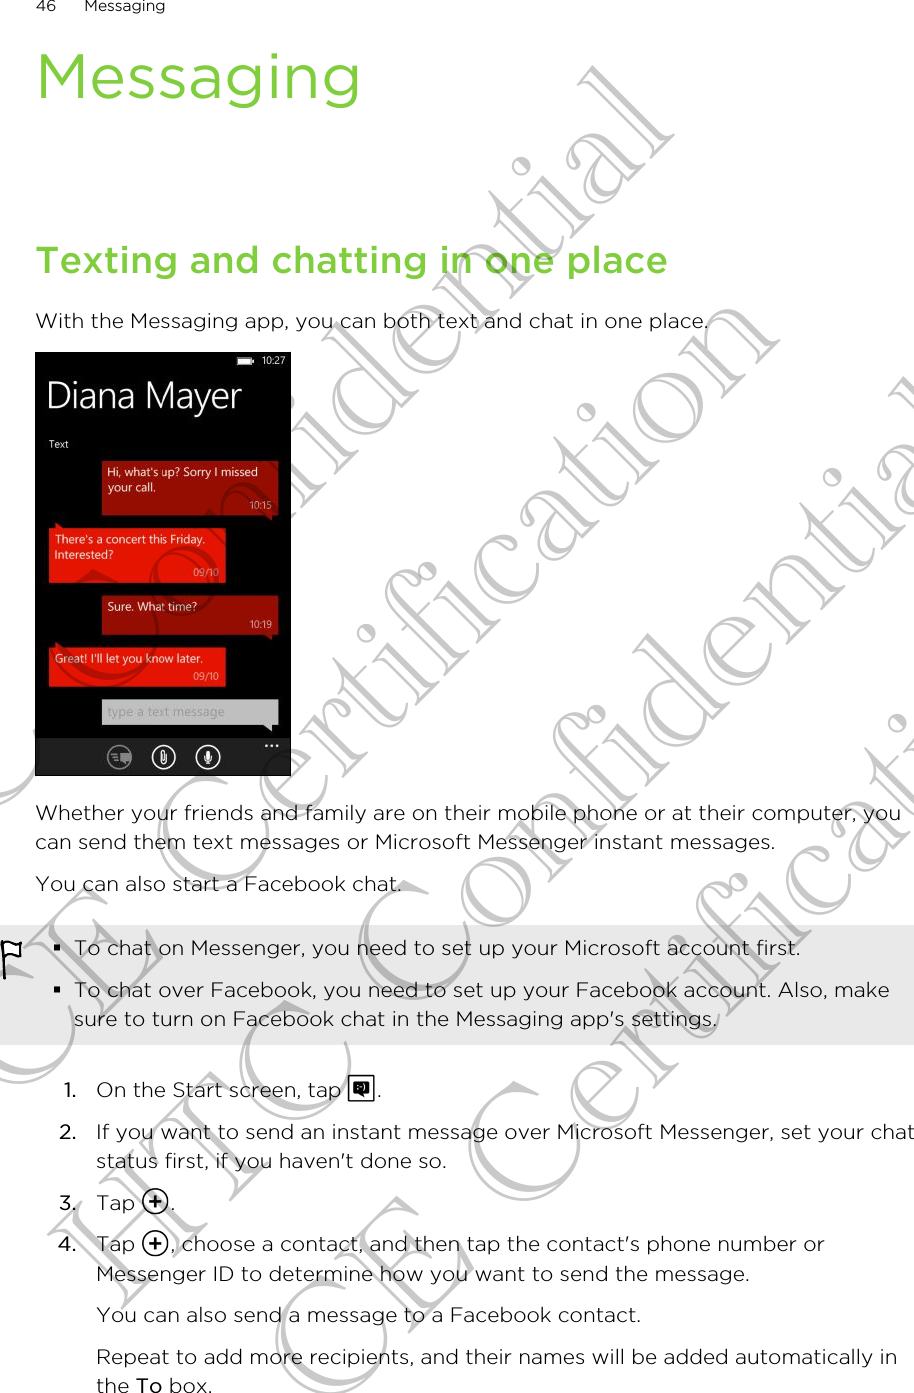 MessagingTexting and chatting in one placeWith the Messaging app, you can both text and chat in one place.Whether your friends and family are on their mobile phone or at their computer, youcan send them text messages or Microsoft Messenger instant messages.You can also start a Facebook chat.§To chat on Messenger, you need to set up your Microsoft account first.§To chat over Facebook, you need to set up your Facebook account. Also, makesure to turn on Facebook chat in the Messaging app&apos;s settings.1. On the Start screen, tap  .2. If you want to send an instant message over Microsoft Messenger, set your chatstatus first, if you haven&apos;t done so.3. Tap  .4. Tap  , choose a contact, and then tap the contact&apos;s phone number orMessenger ID to determine how you want to send the message. You can also send a message to a Facebook contact.Repeat to add more recipients, and their names will be added automatically inthe To box.46 MessagingHTC Confidential CE Certification HTC Confidential CE Certification